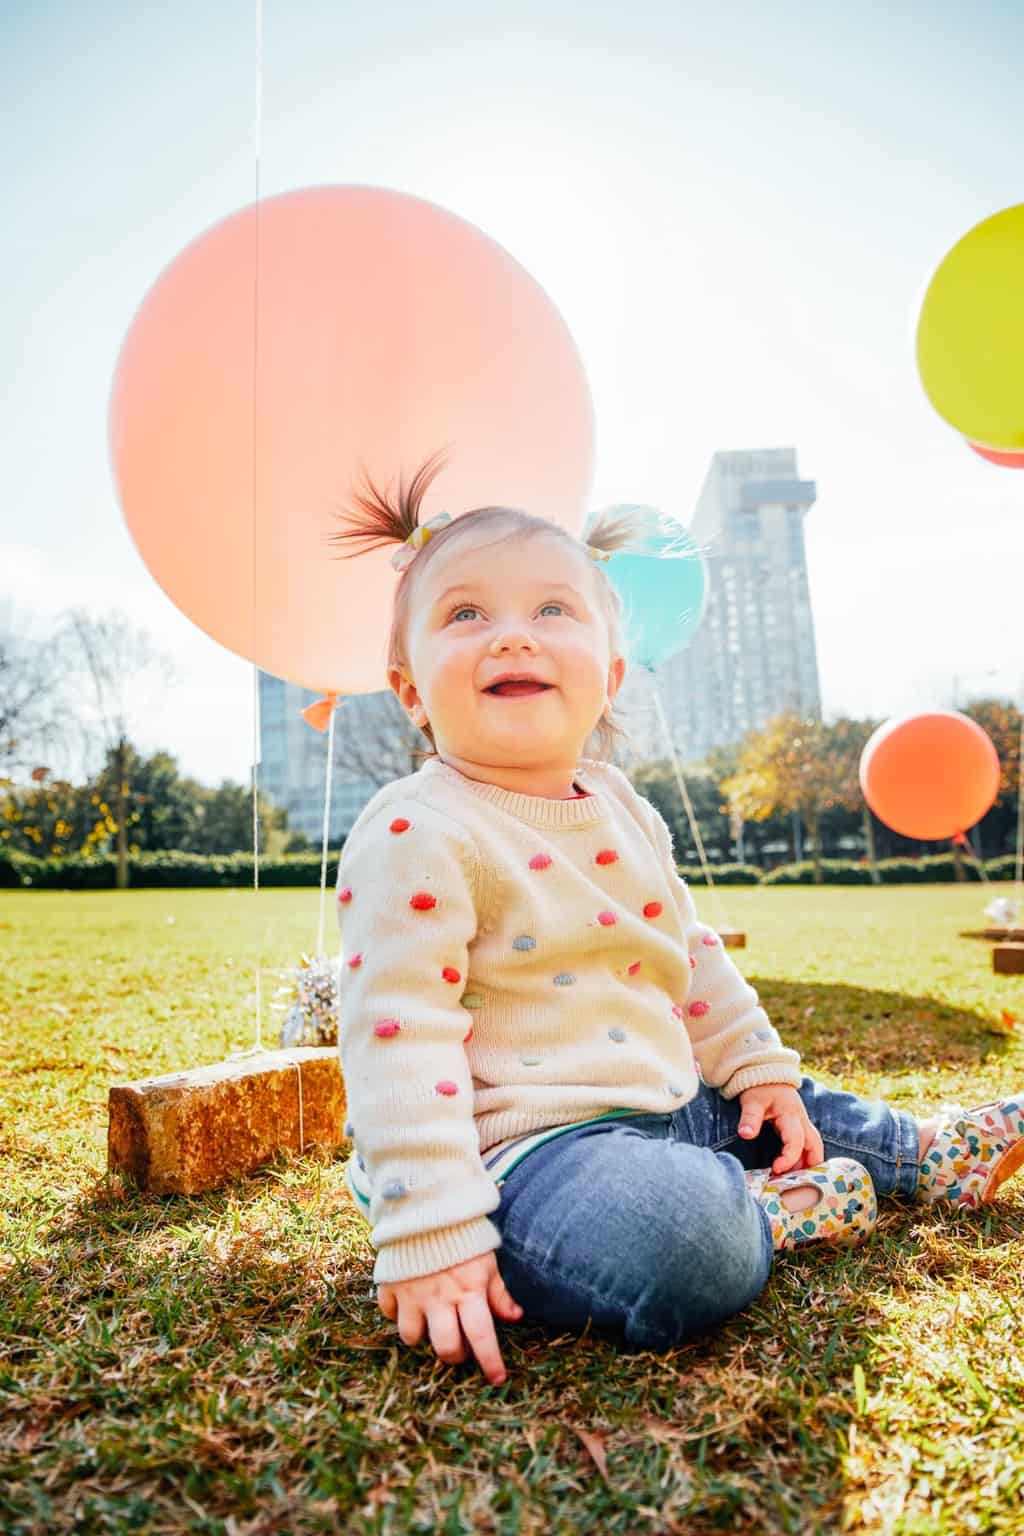 Gwen in the park! - Things I Didn't Know About Basic Financial Planning + Insurance Until Having A Family by top Houston lifestyle blogger Ashley Rose of Sugar & Cloth - #family #budget #budgeting #tips #planning #finances #financial #insurance #help #guide 